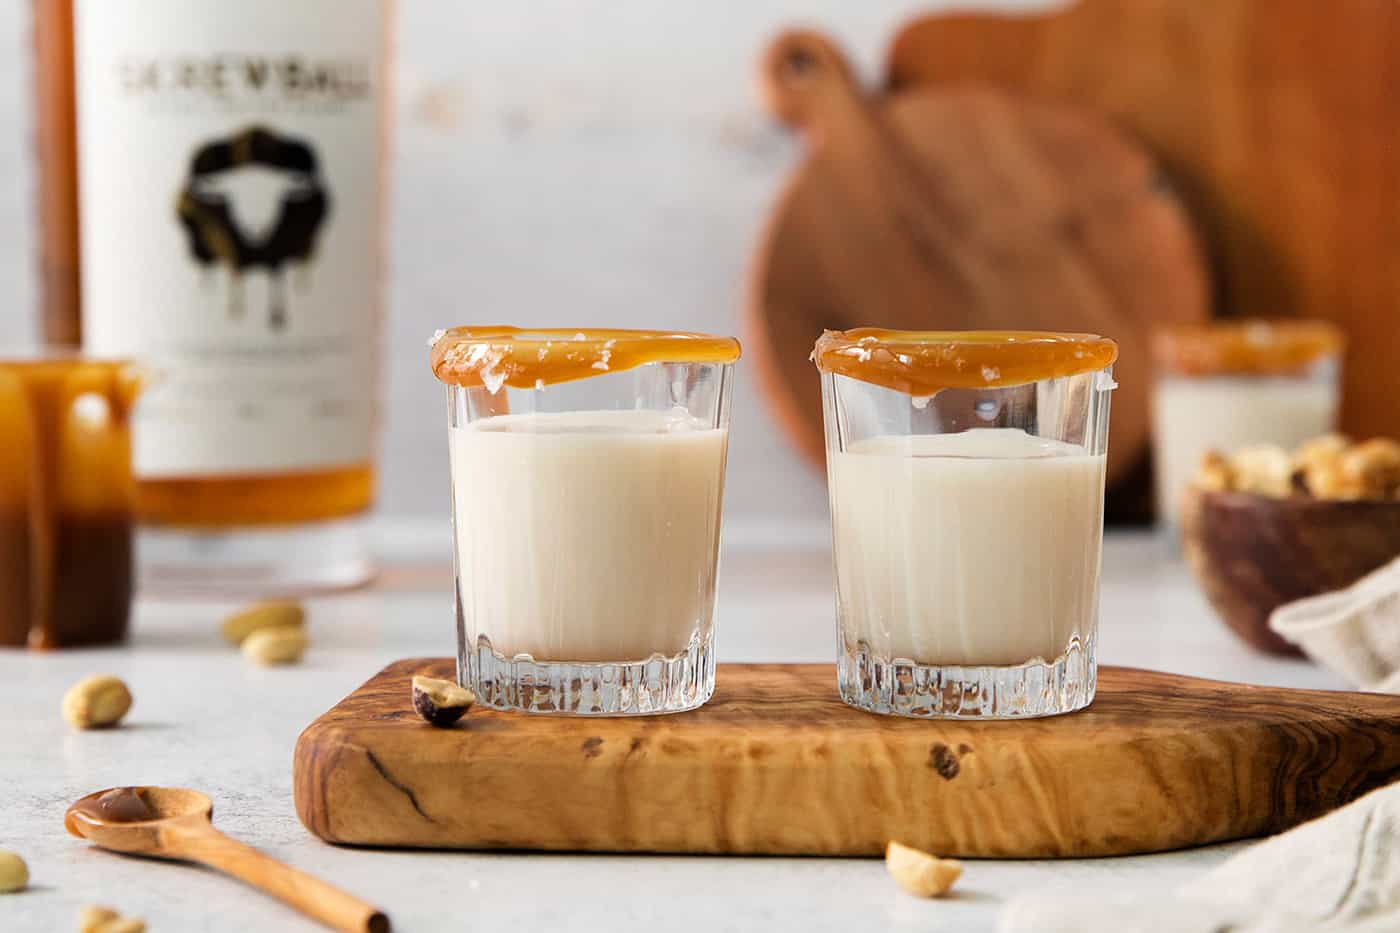 Salted Nut Roll Shot: Crafting and Enjoying the Flavors of a Salted Nut Roll Shot